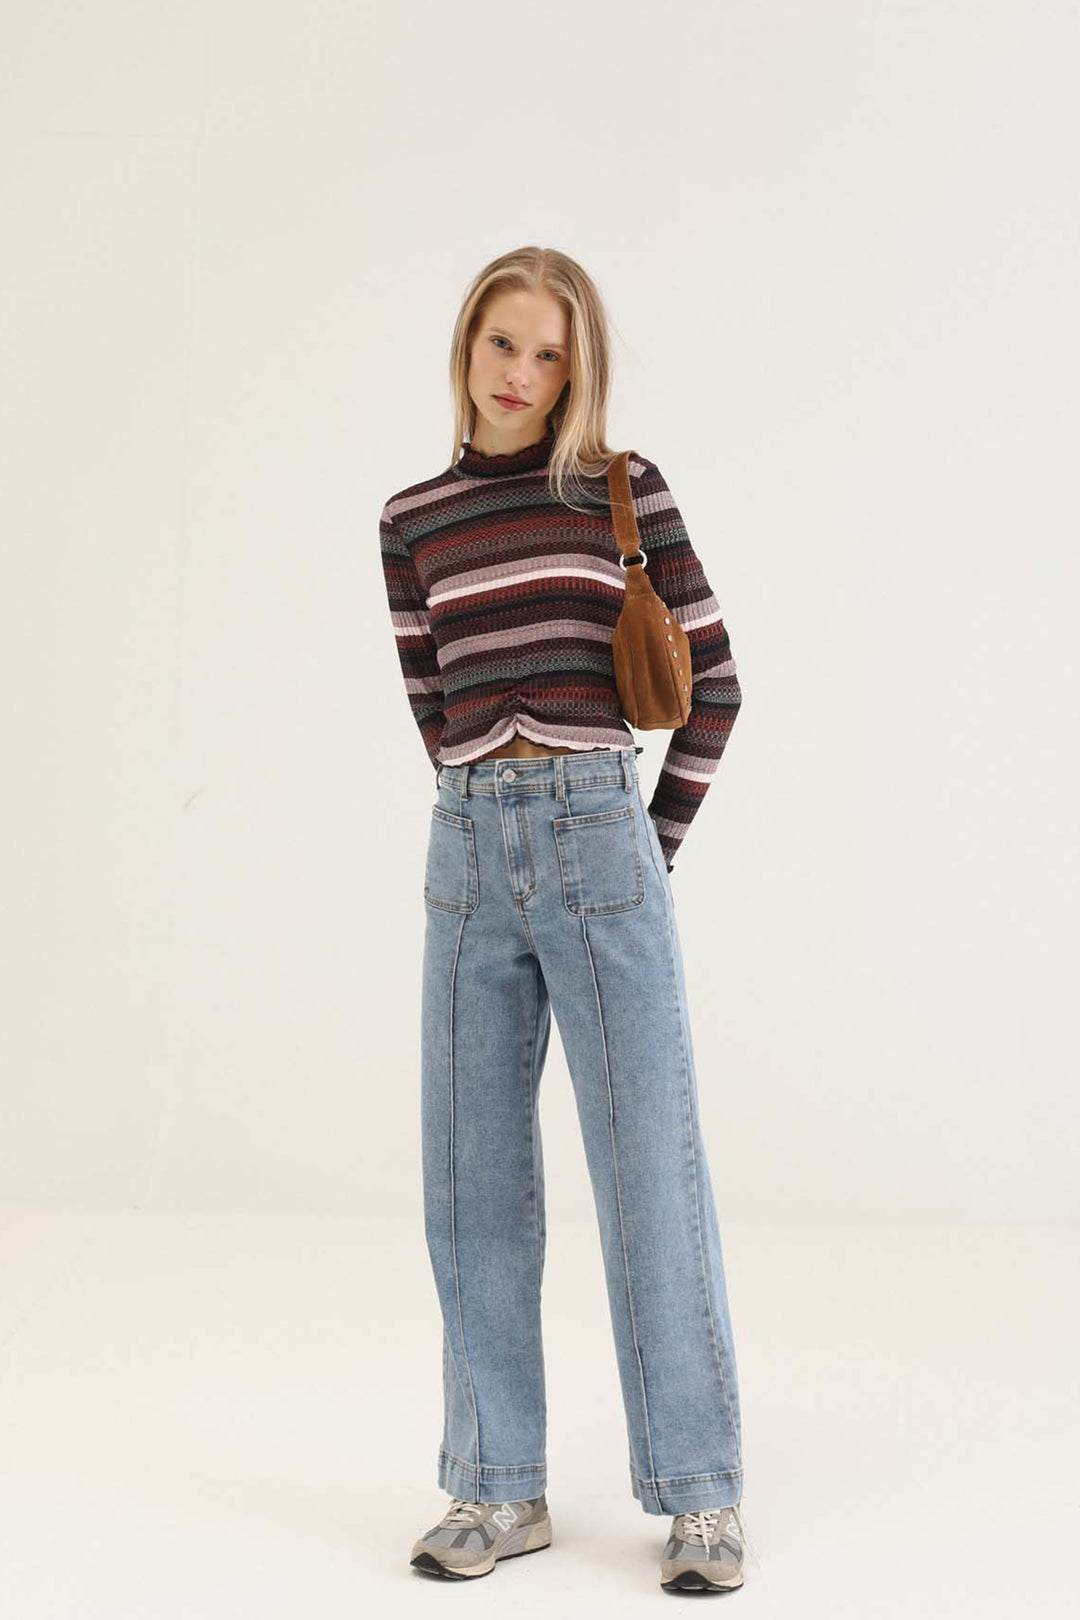 BASIC CULOTTE JEANS WITH DENIM SEAMS